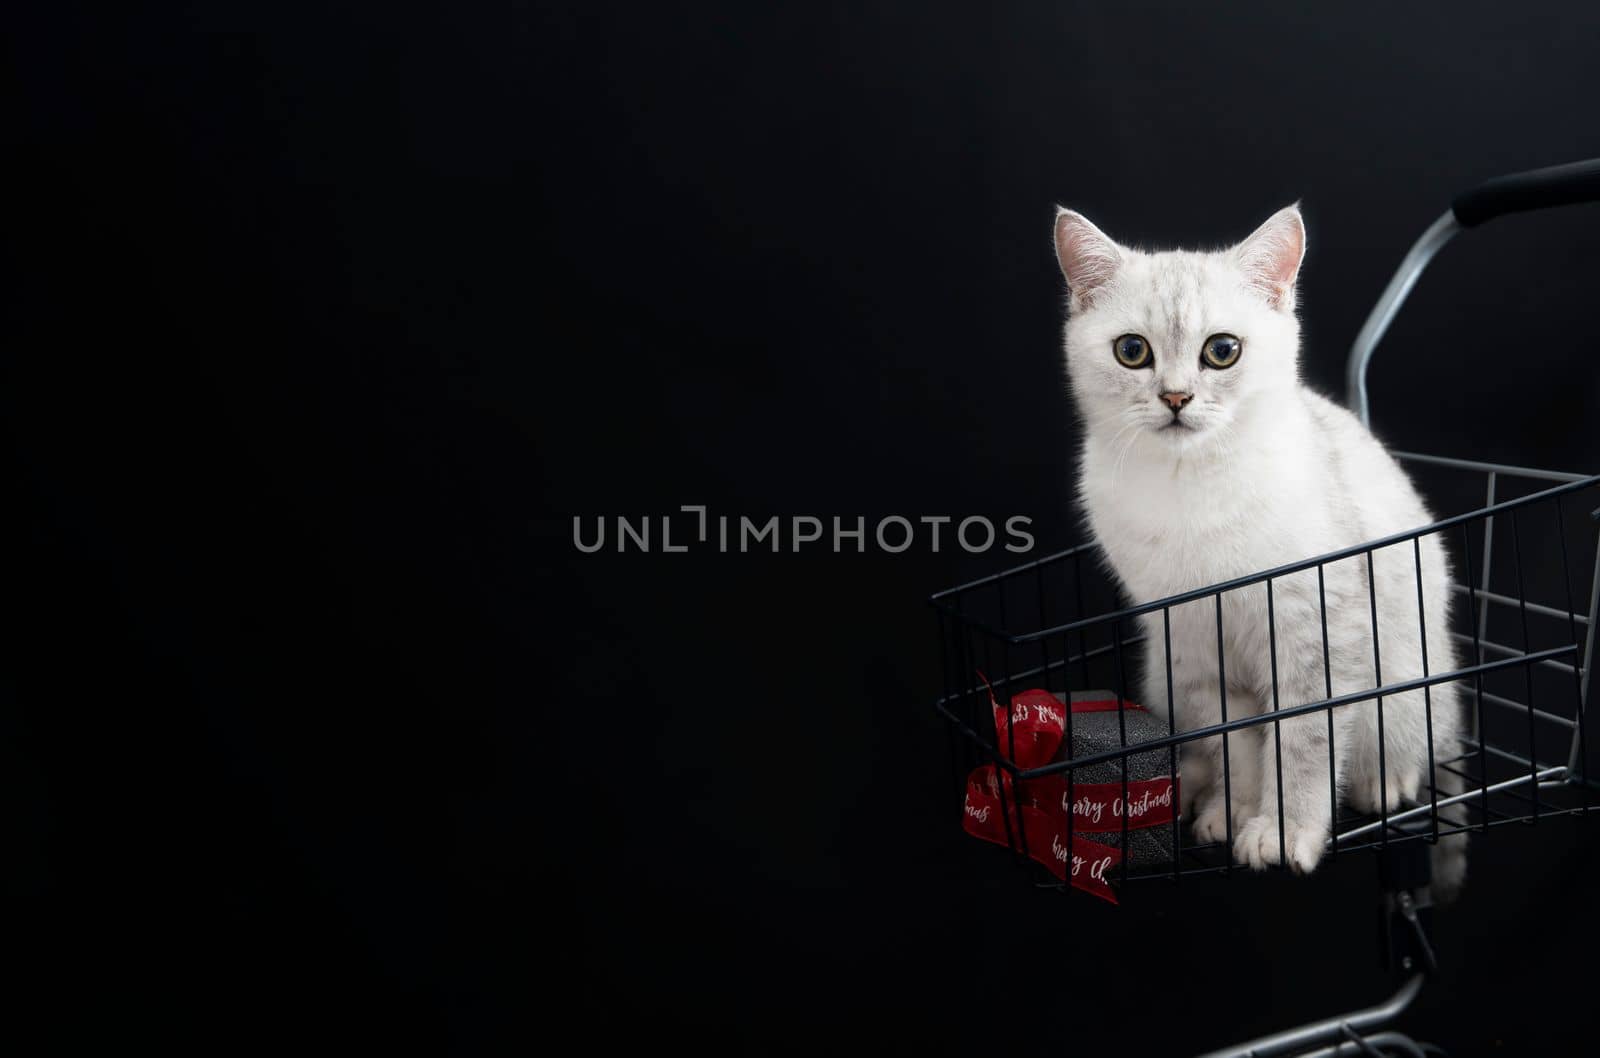 small scottish kitten in a shopping cart along with gift boxes pet for christmas as a gift, High quality photo